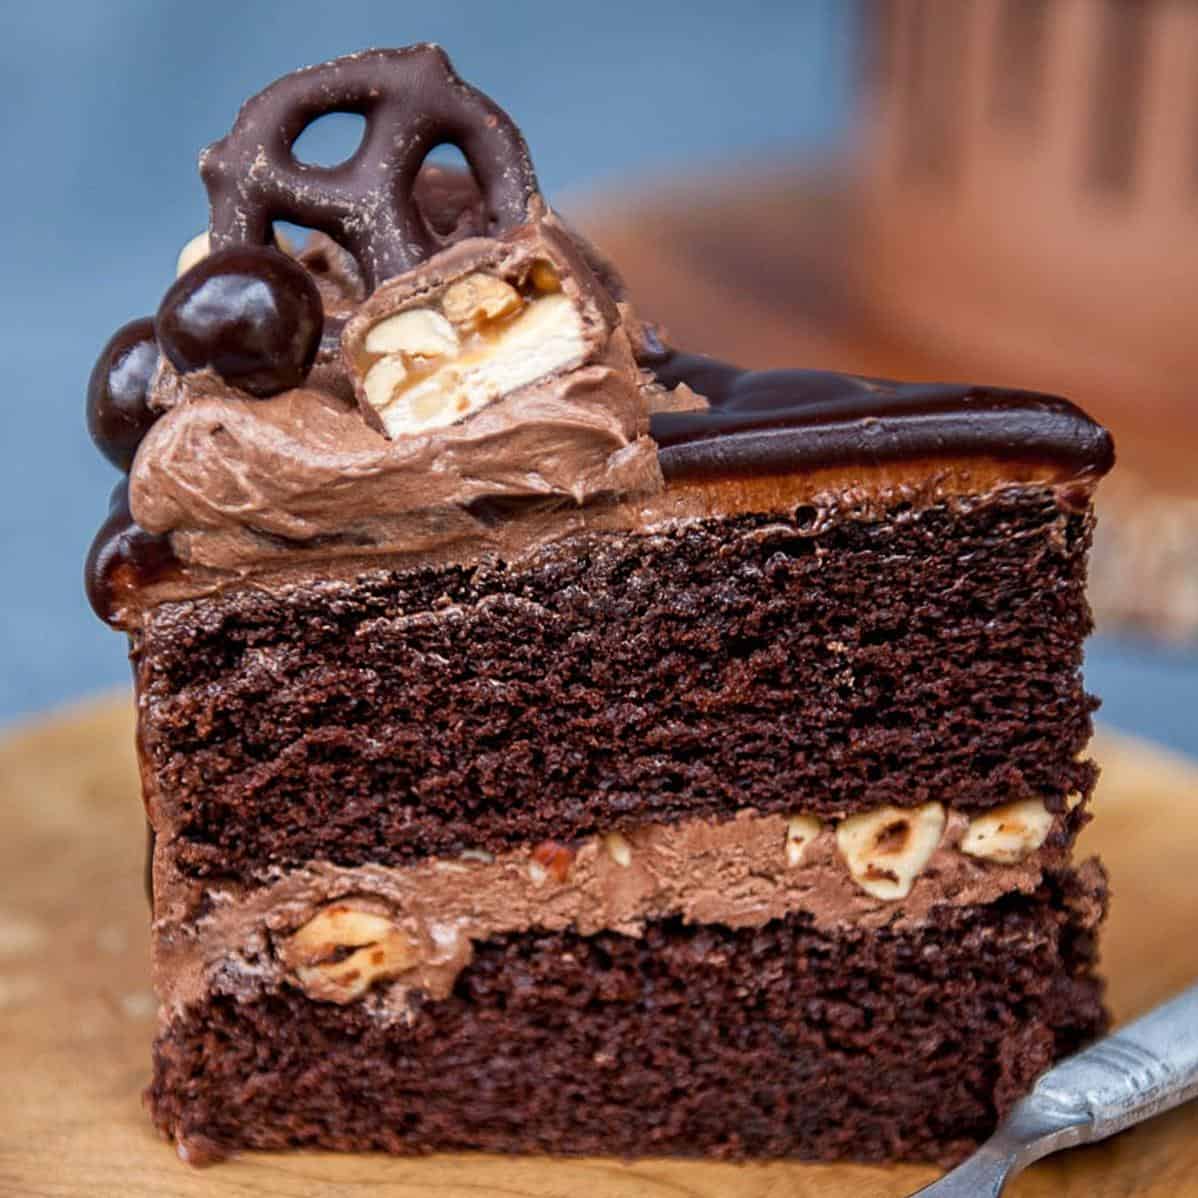  You won't be able to resist a second slice of this decadent cake.